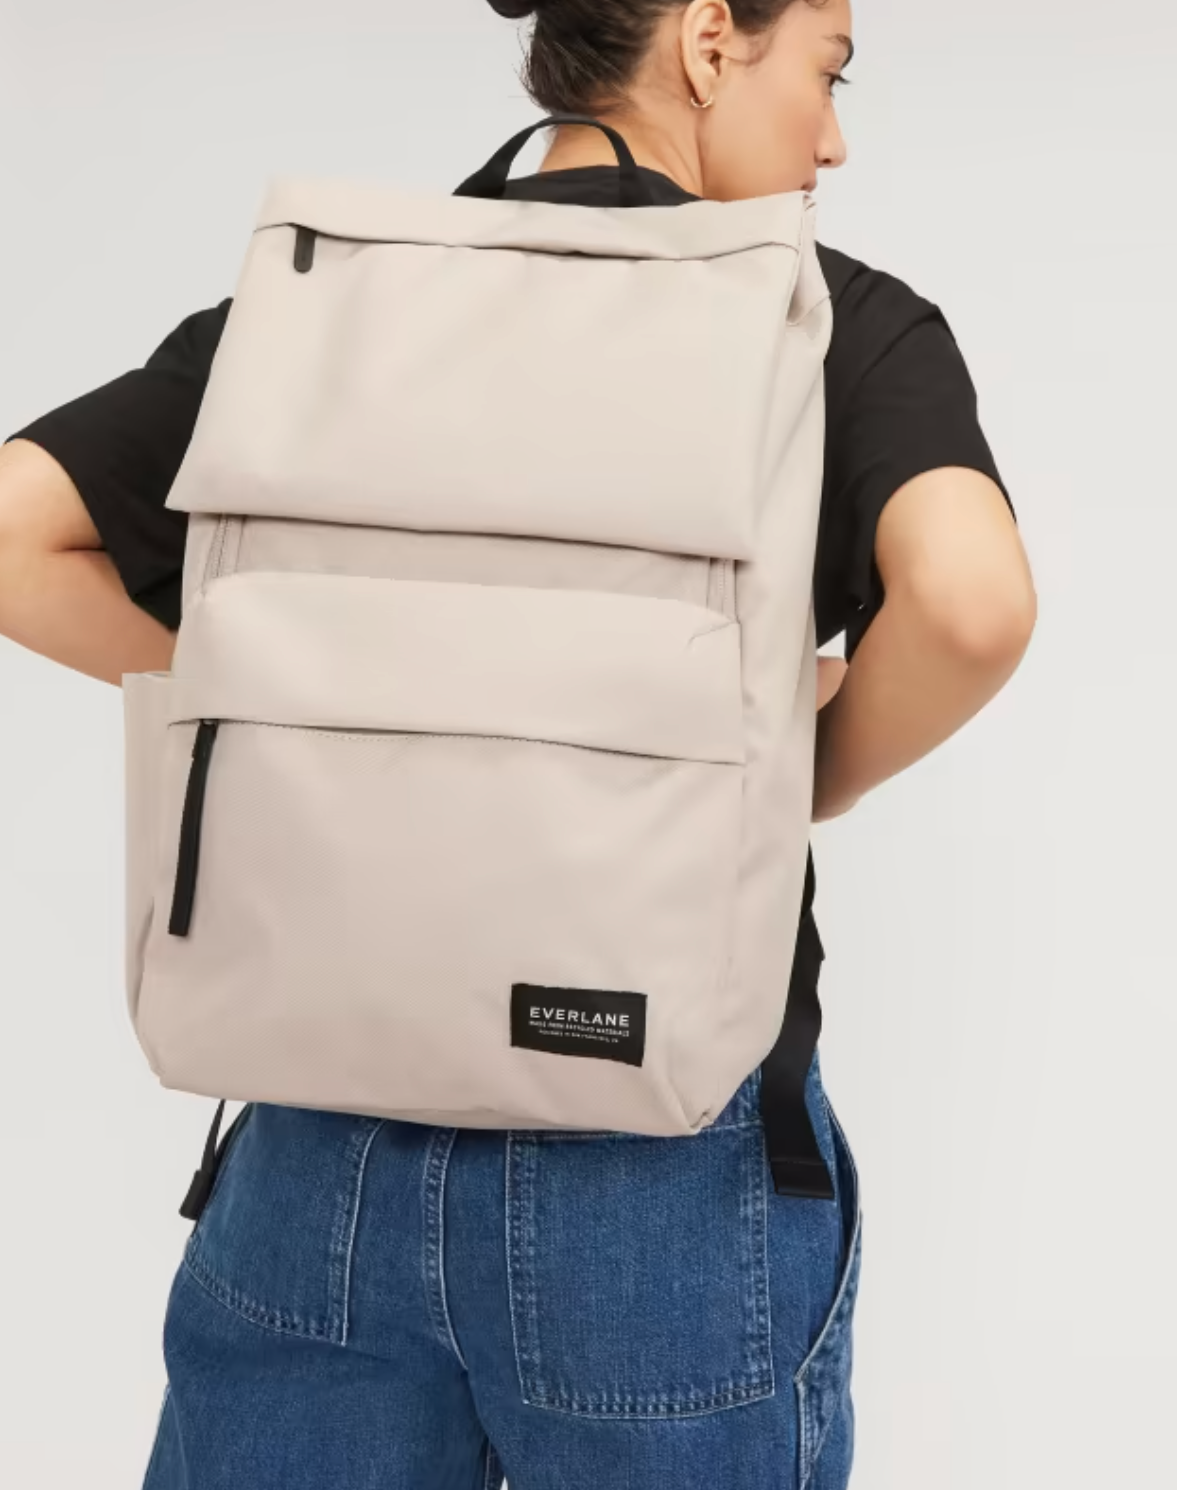 A model wears the Everlane ReNew Transit Backpack on her back.